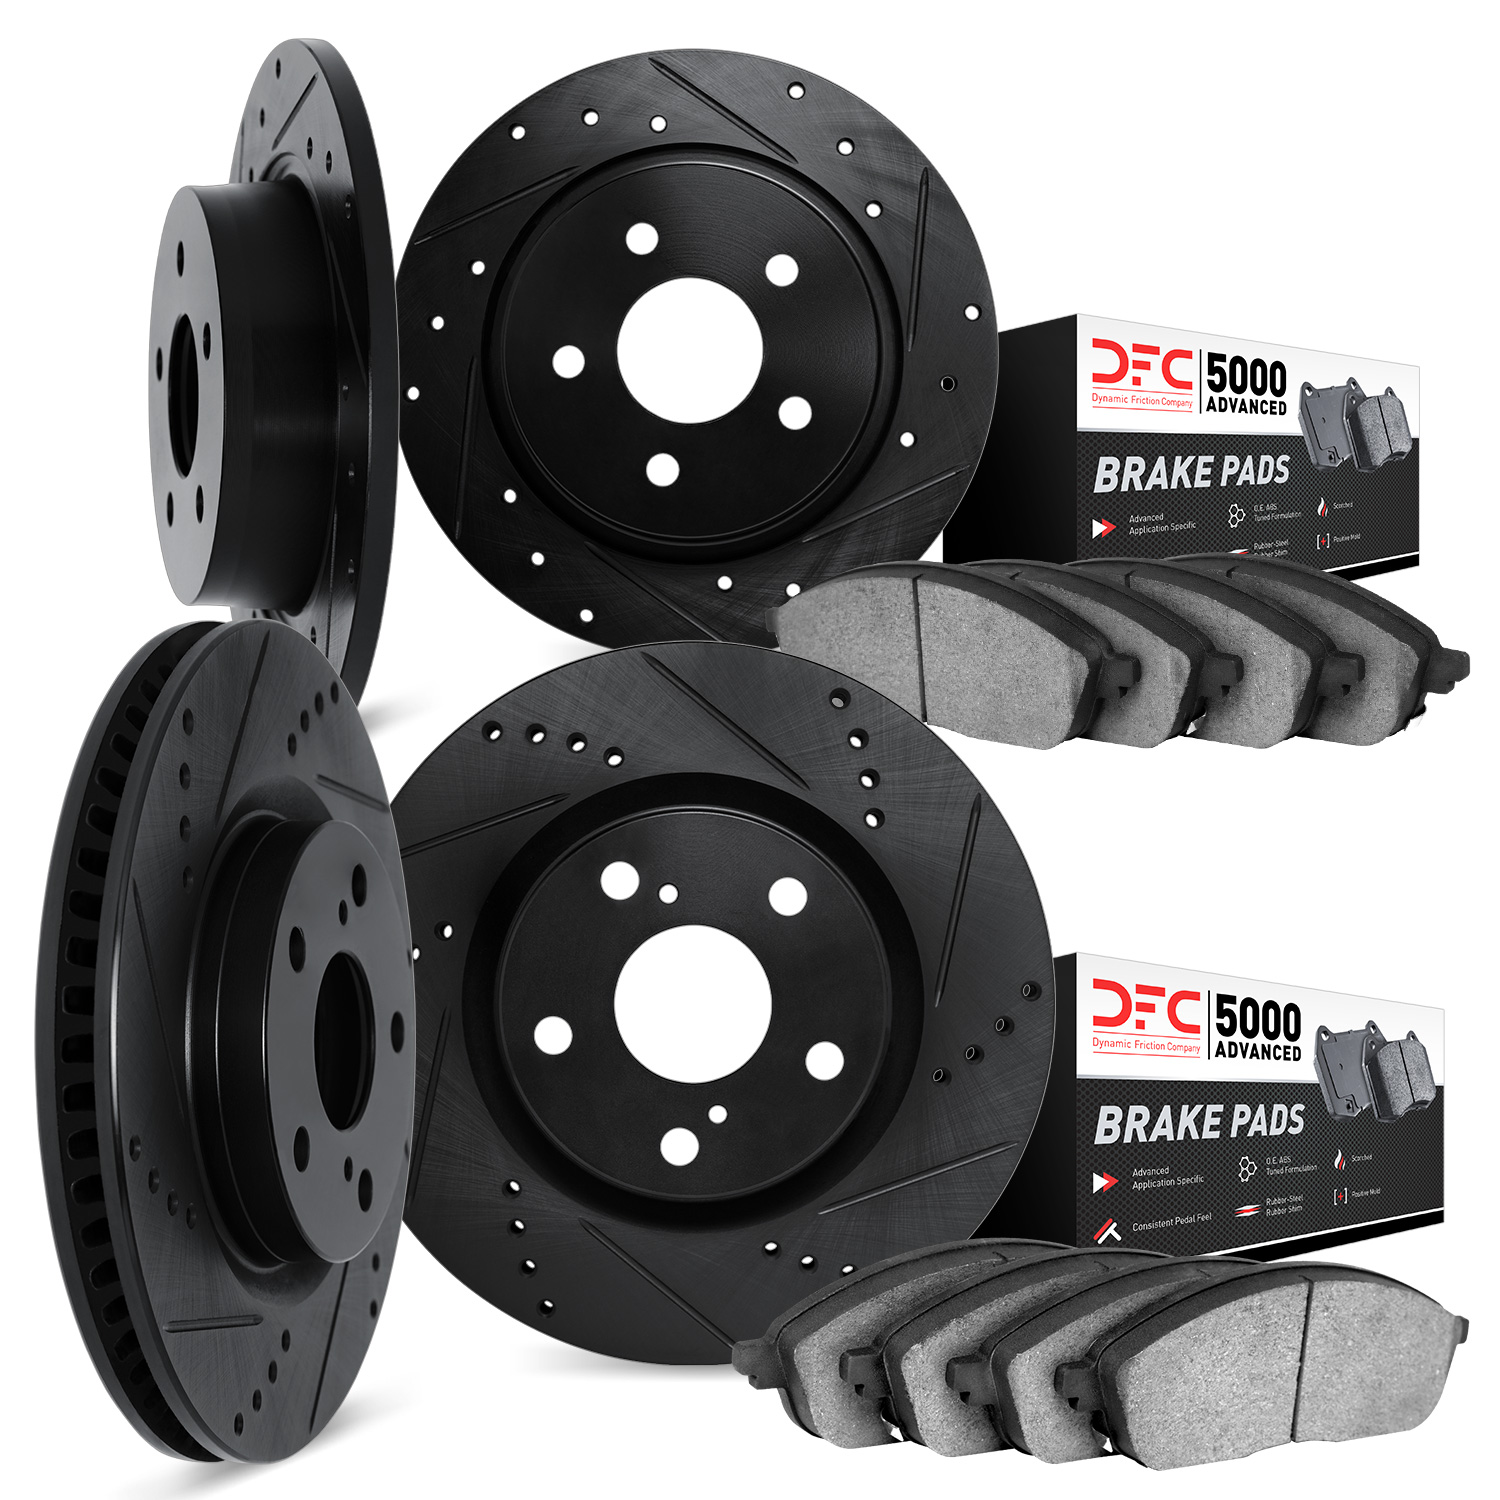 8504-76144 Drilled/Slotted Brake Rotors w/5000 Advanced Brake Pads Kit [Black], 1994-1995 Lexus/Toyota/Scion, Position: Front an